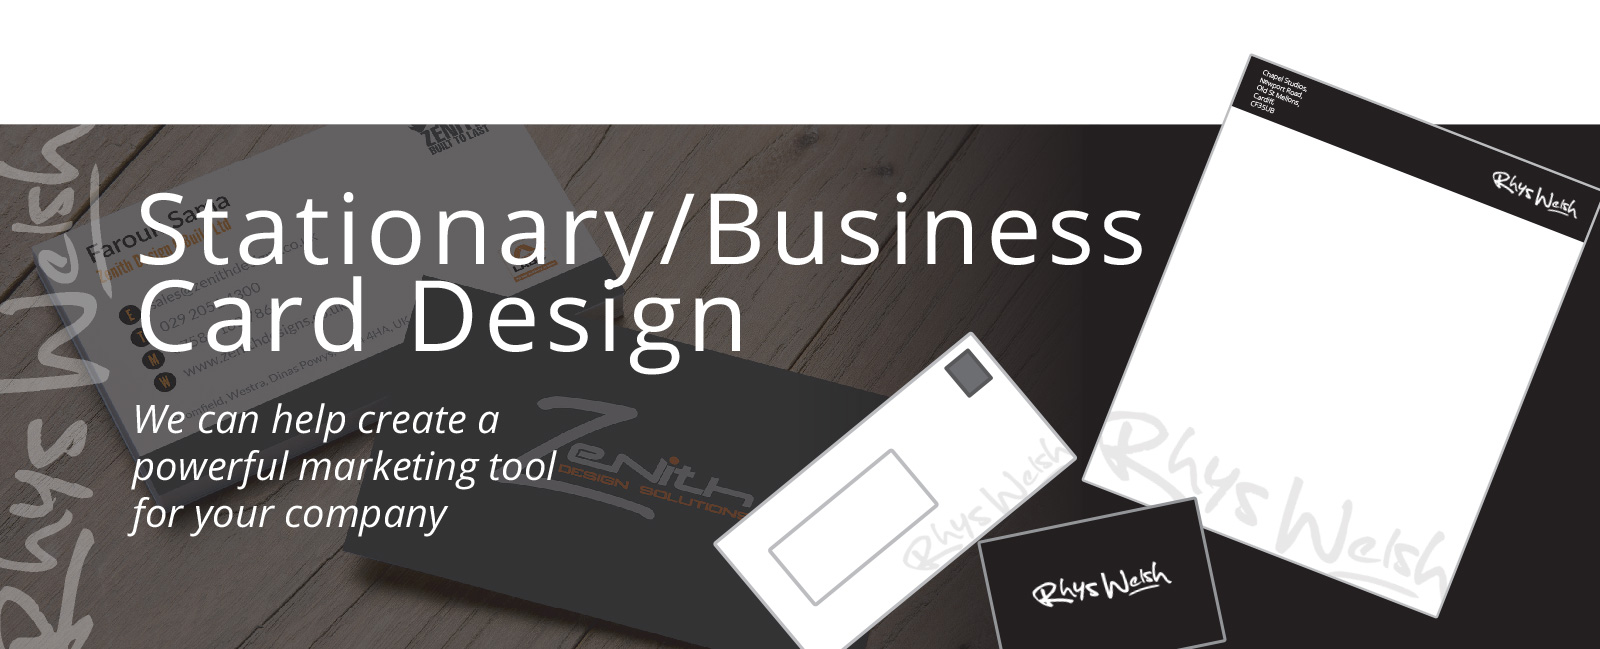 Stationary-Business-Card-Design-Graphic-for-websites-cardiff